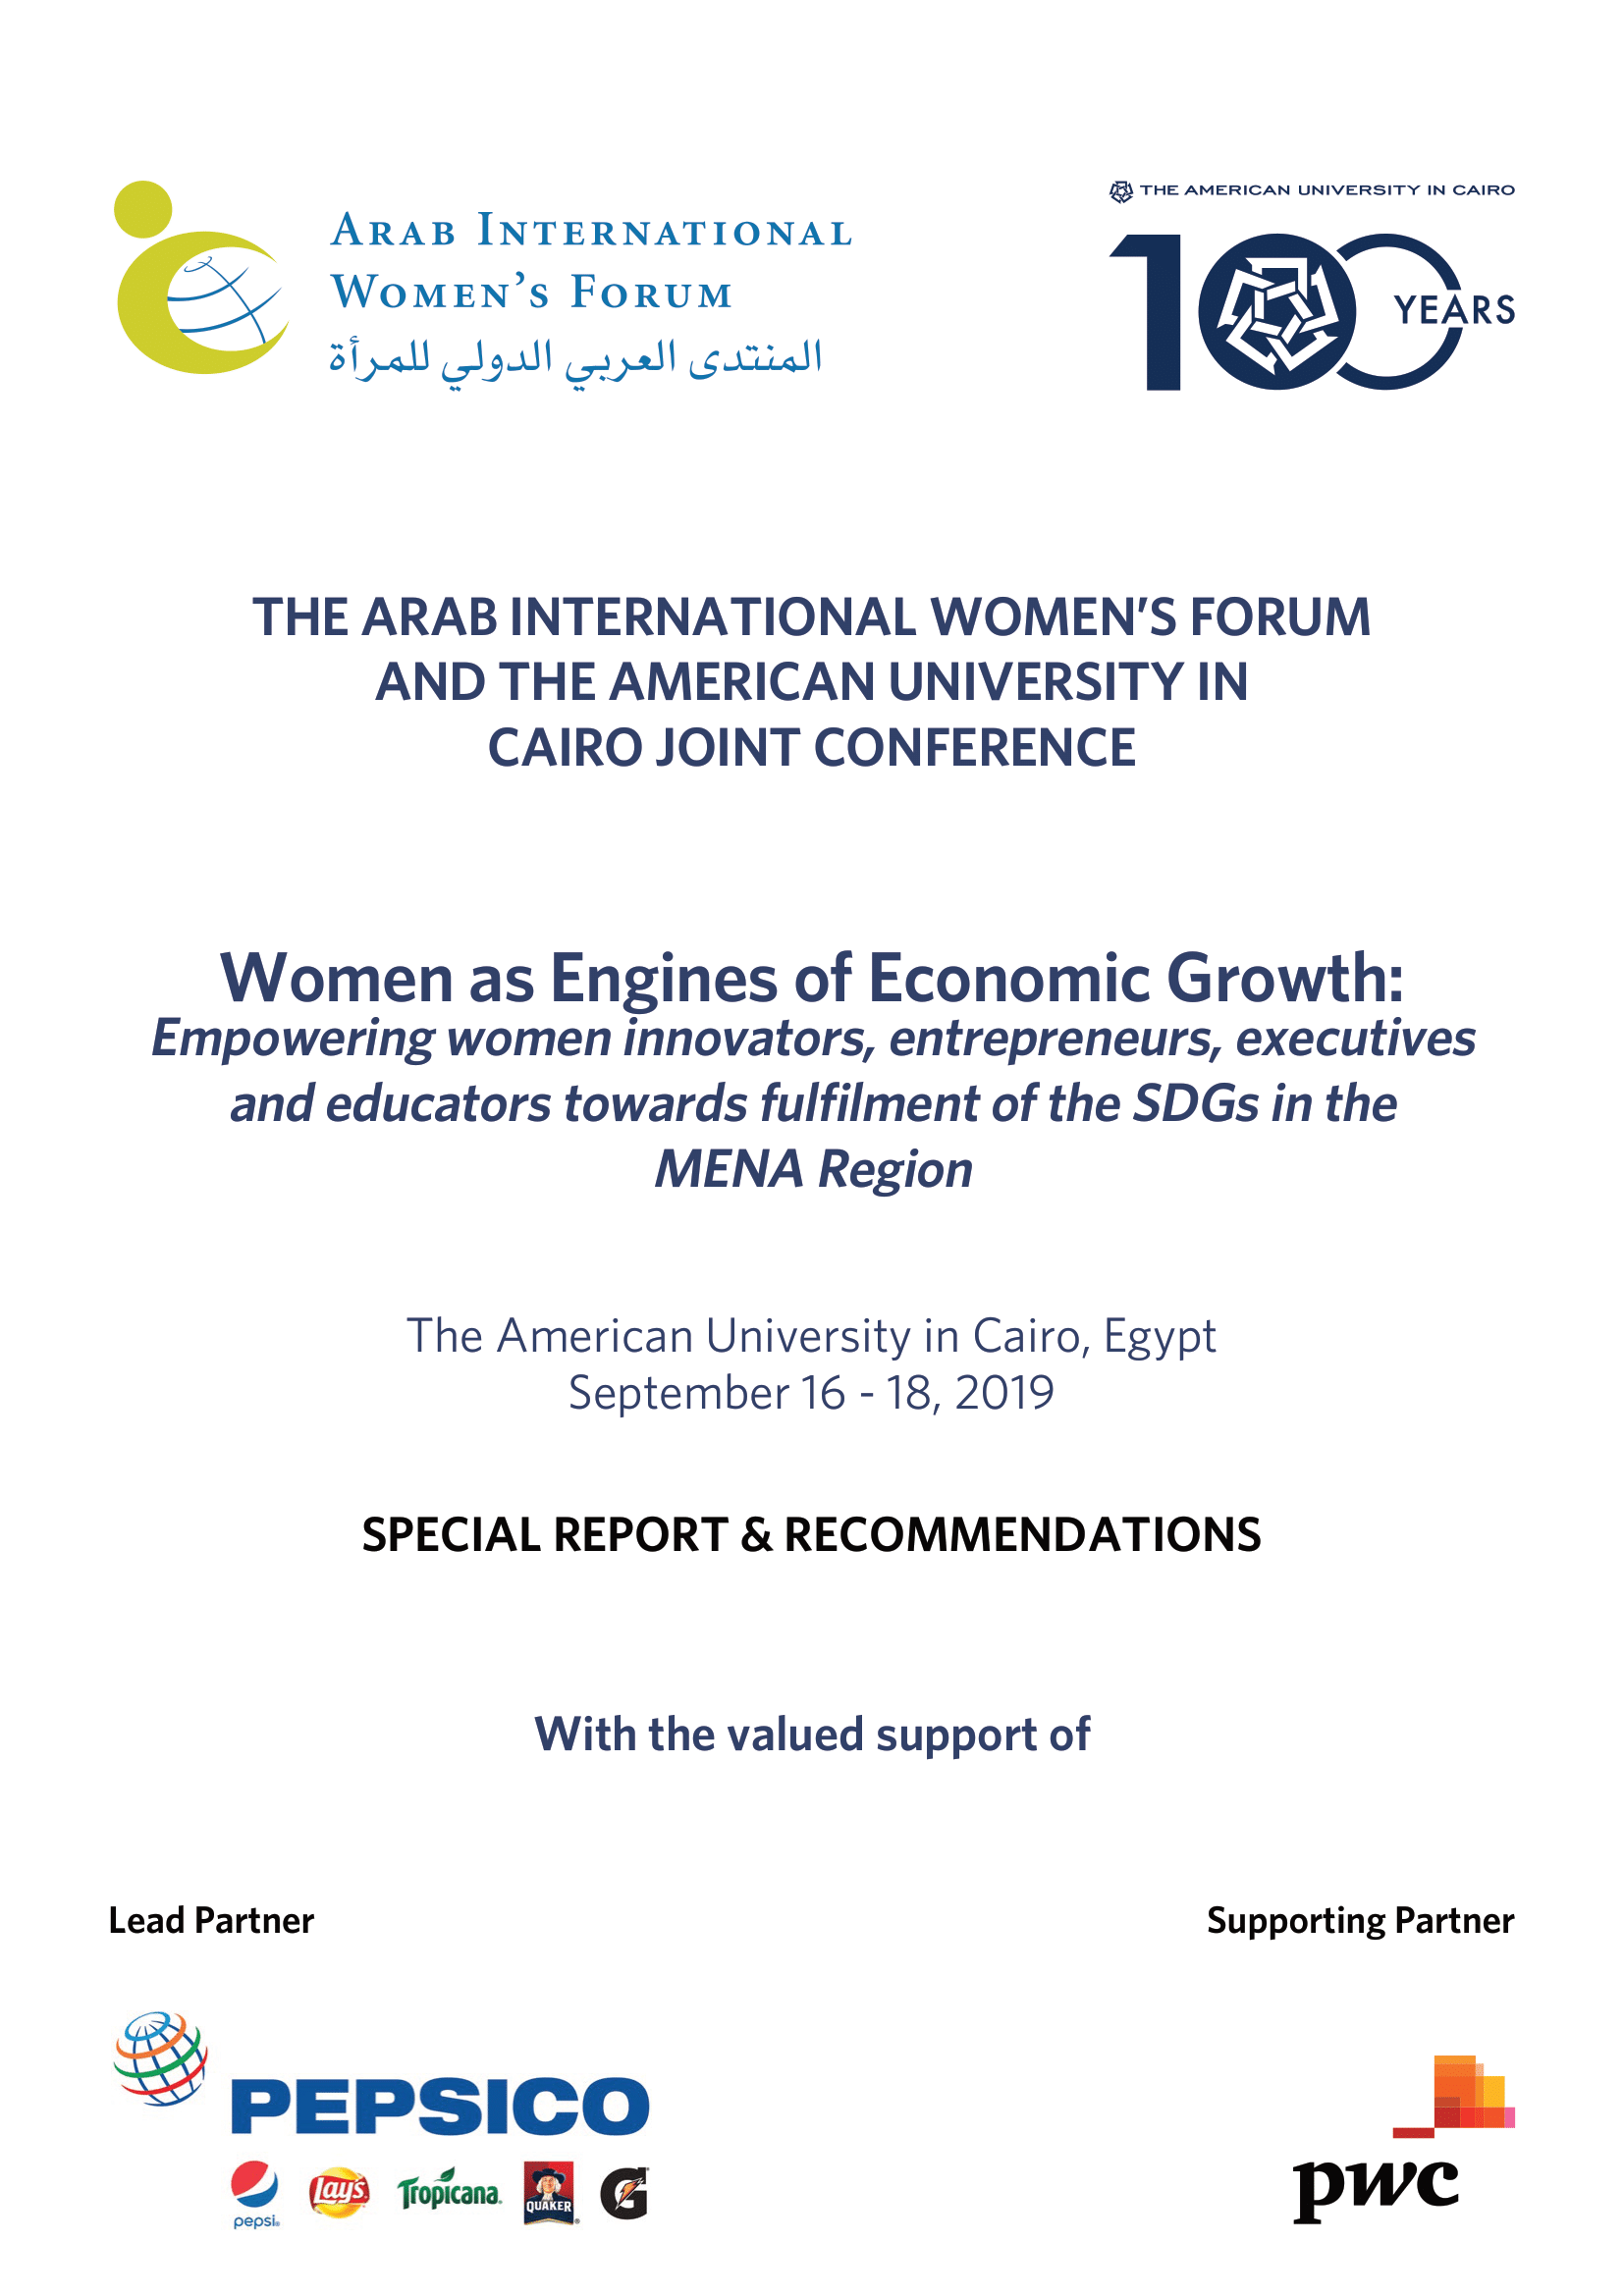 Women as Engines of Economic Growth Special Report & Recommendations (Cairo, September 2019)